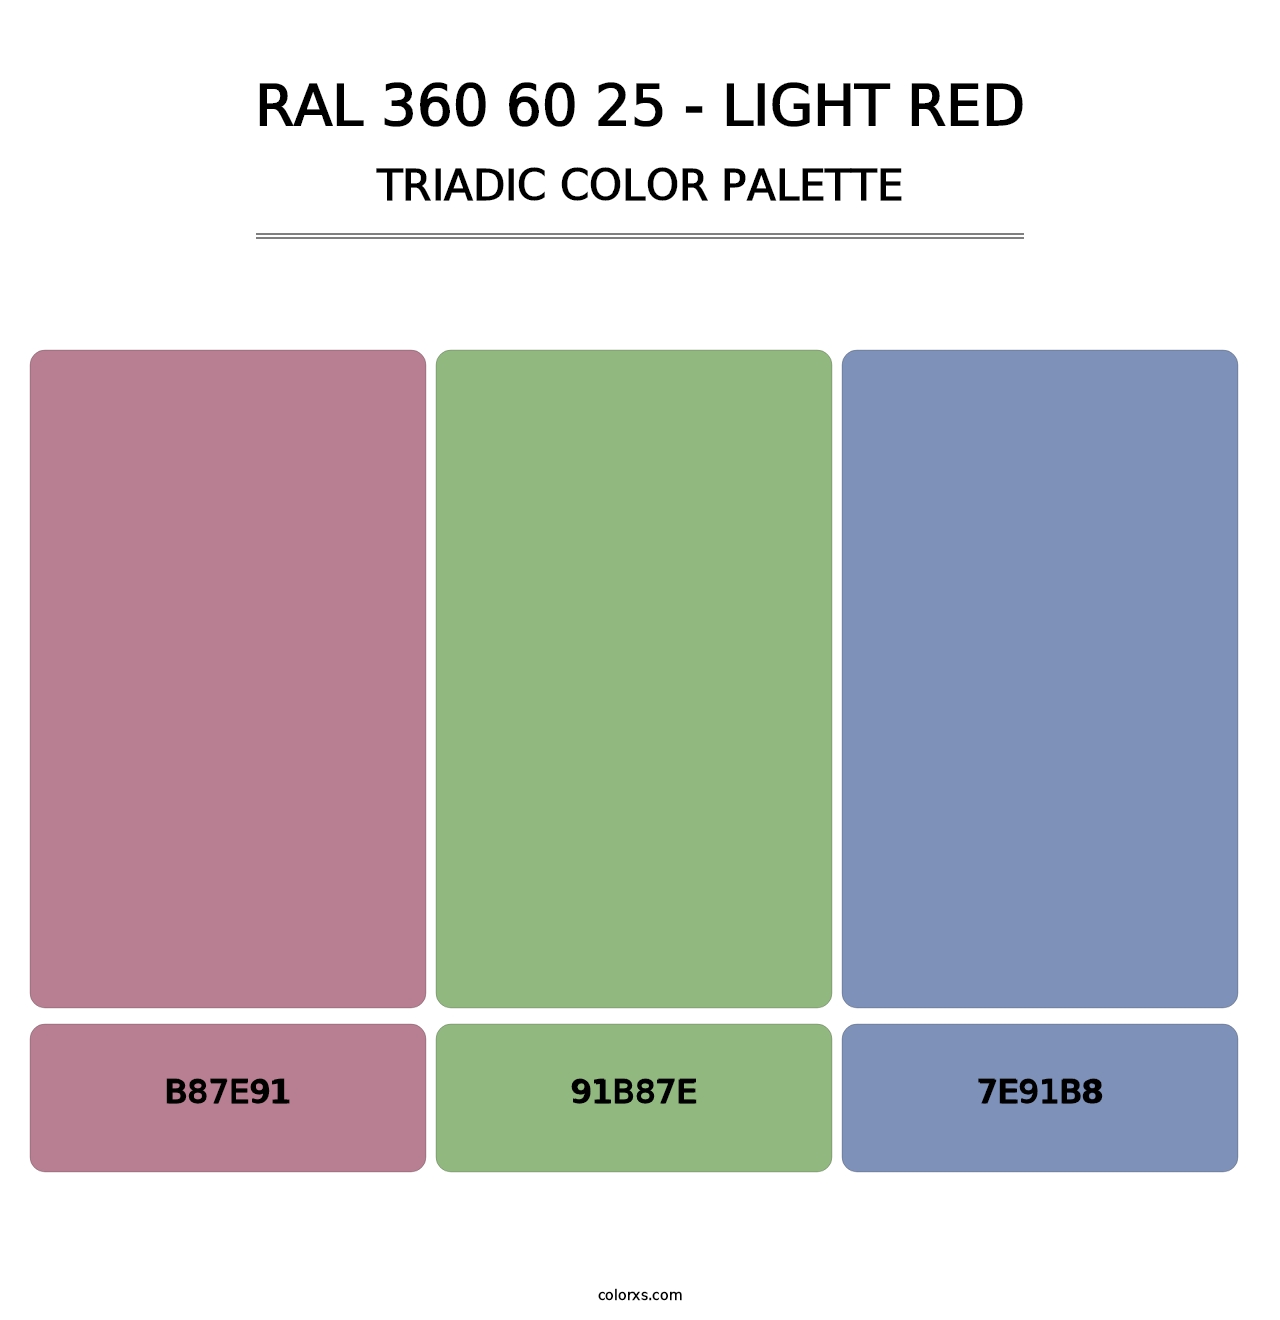 RAL 360 60 25 - Light Red - Triadic Color Palette